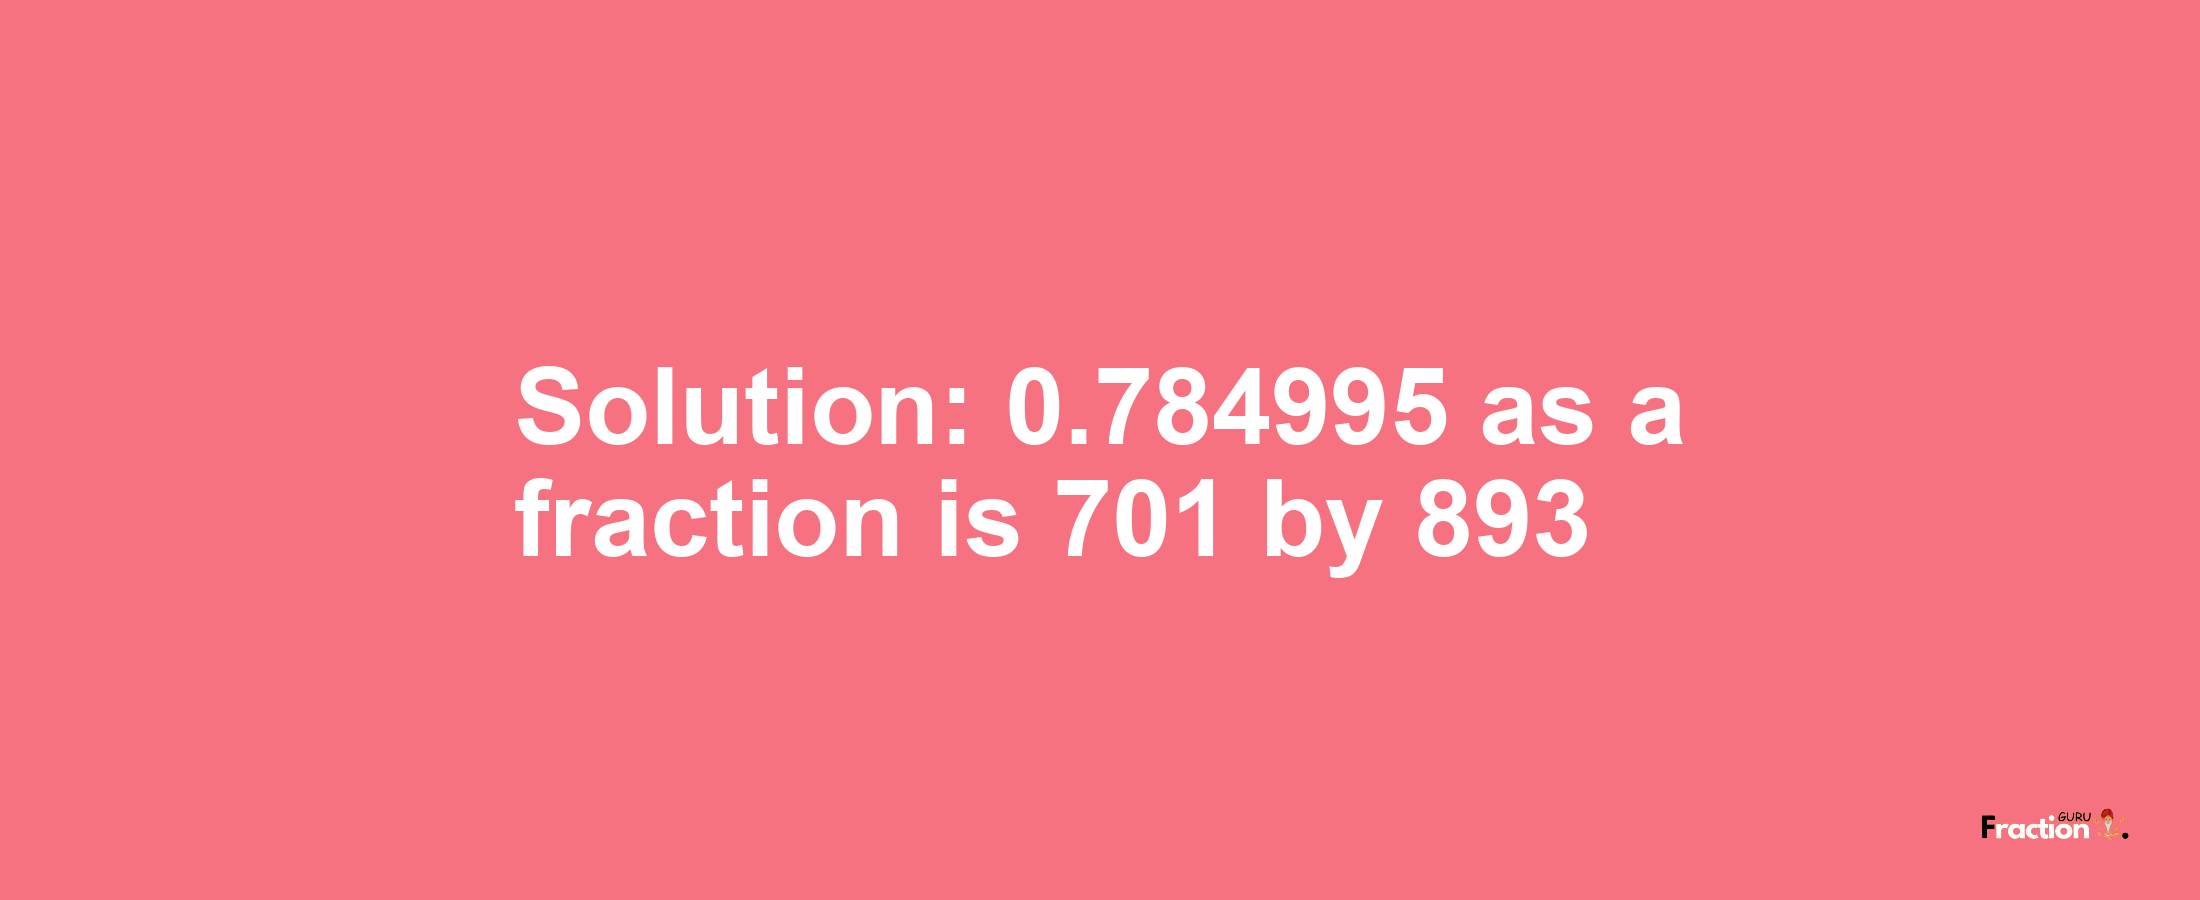 Solution:0.784995 as a fraction is 701/893